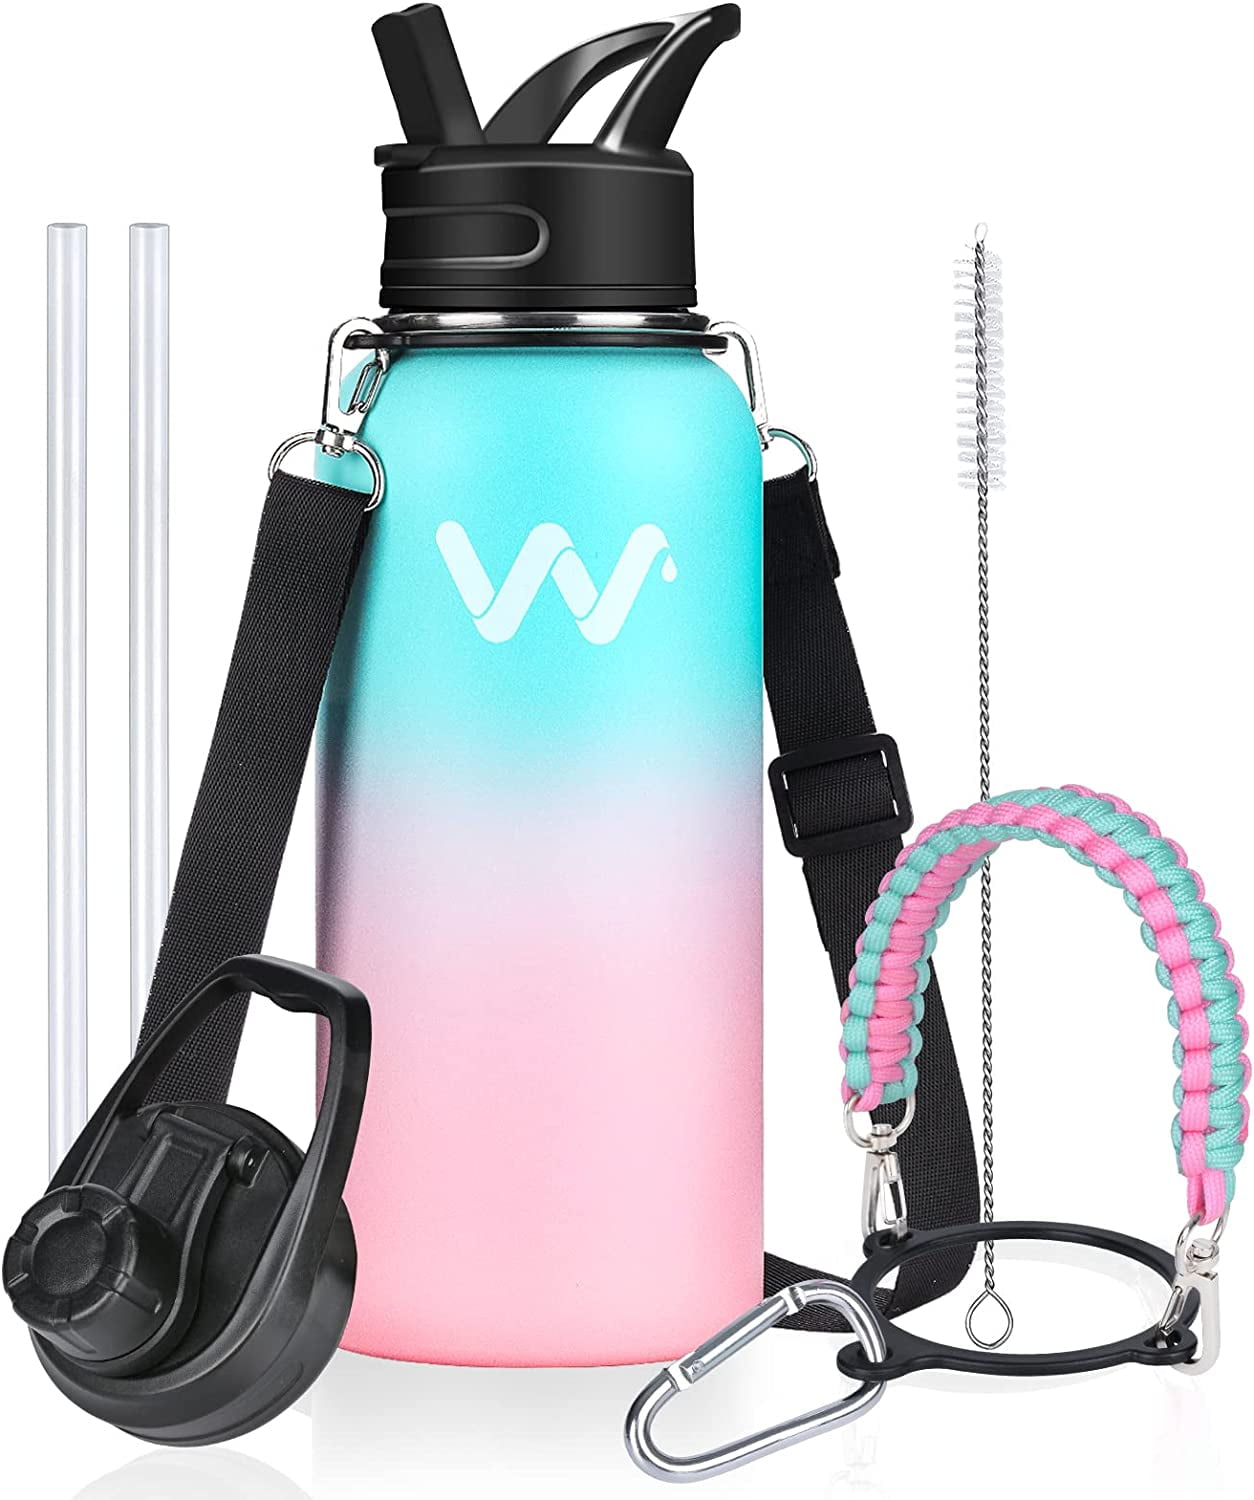 32 Oz. Sport Iconic Vacuum Insulated Stainless Steel Water Bottle  w/Drinking Spout and Straw